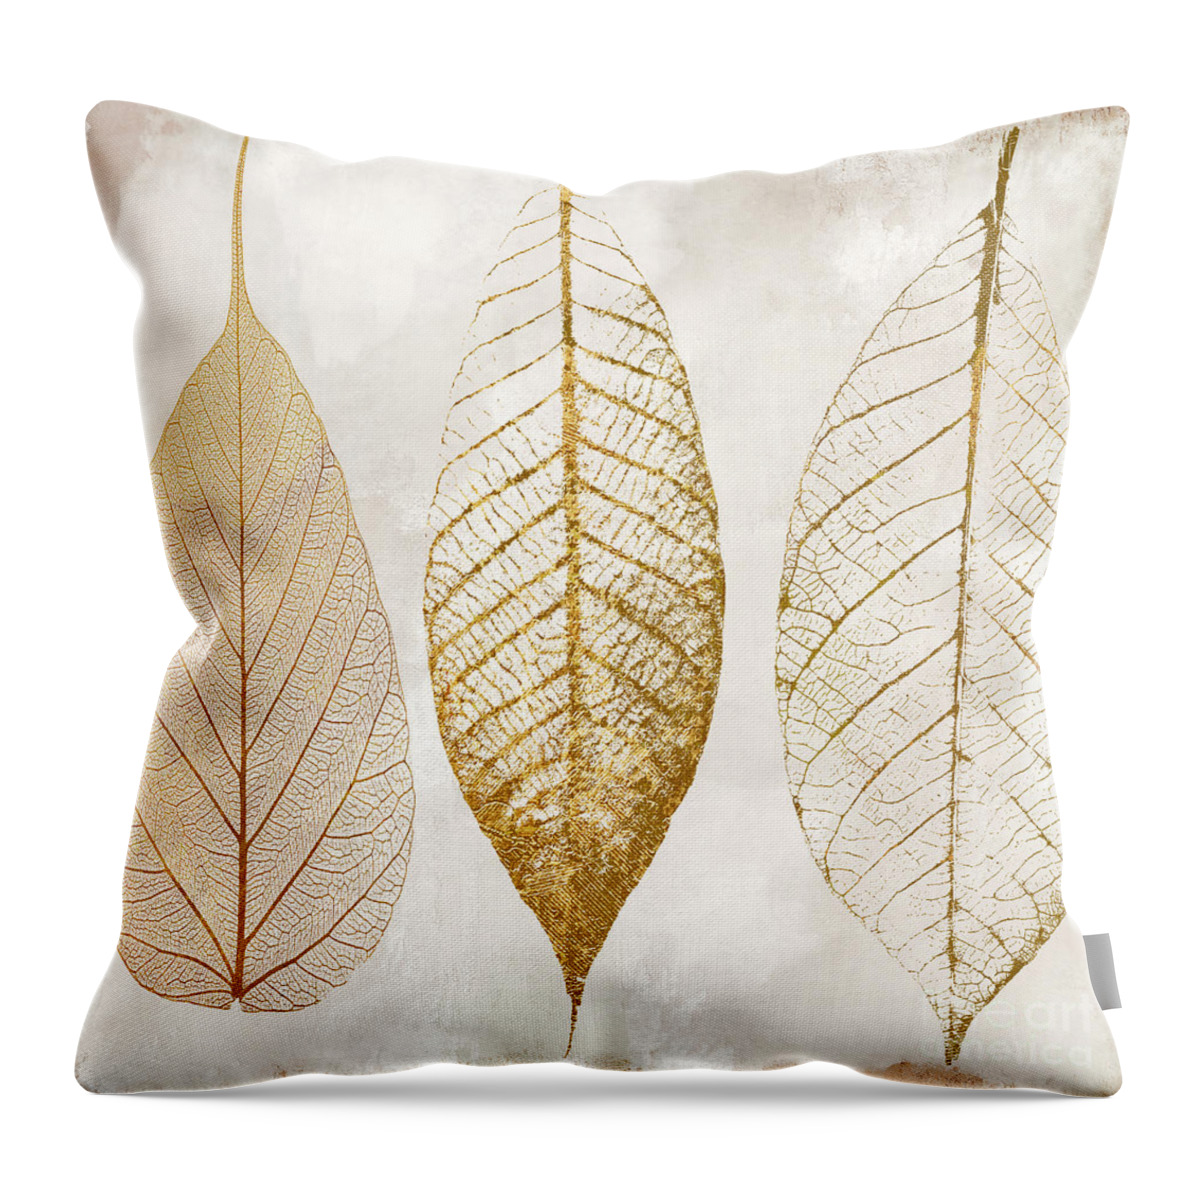 Leaf Throw Pillow featuring the painting Autumn Leaves III Fallen Gold by Mindy Sommers